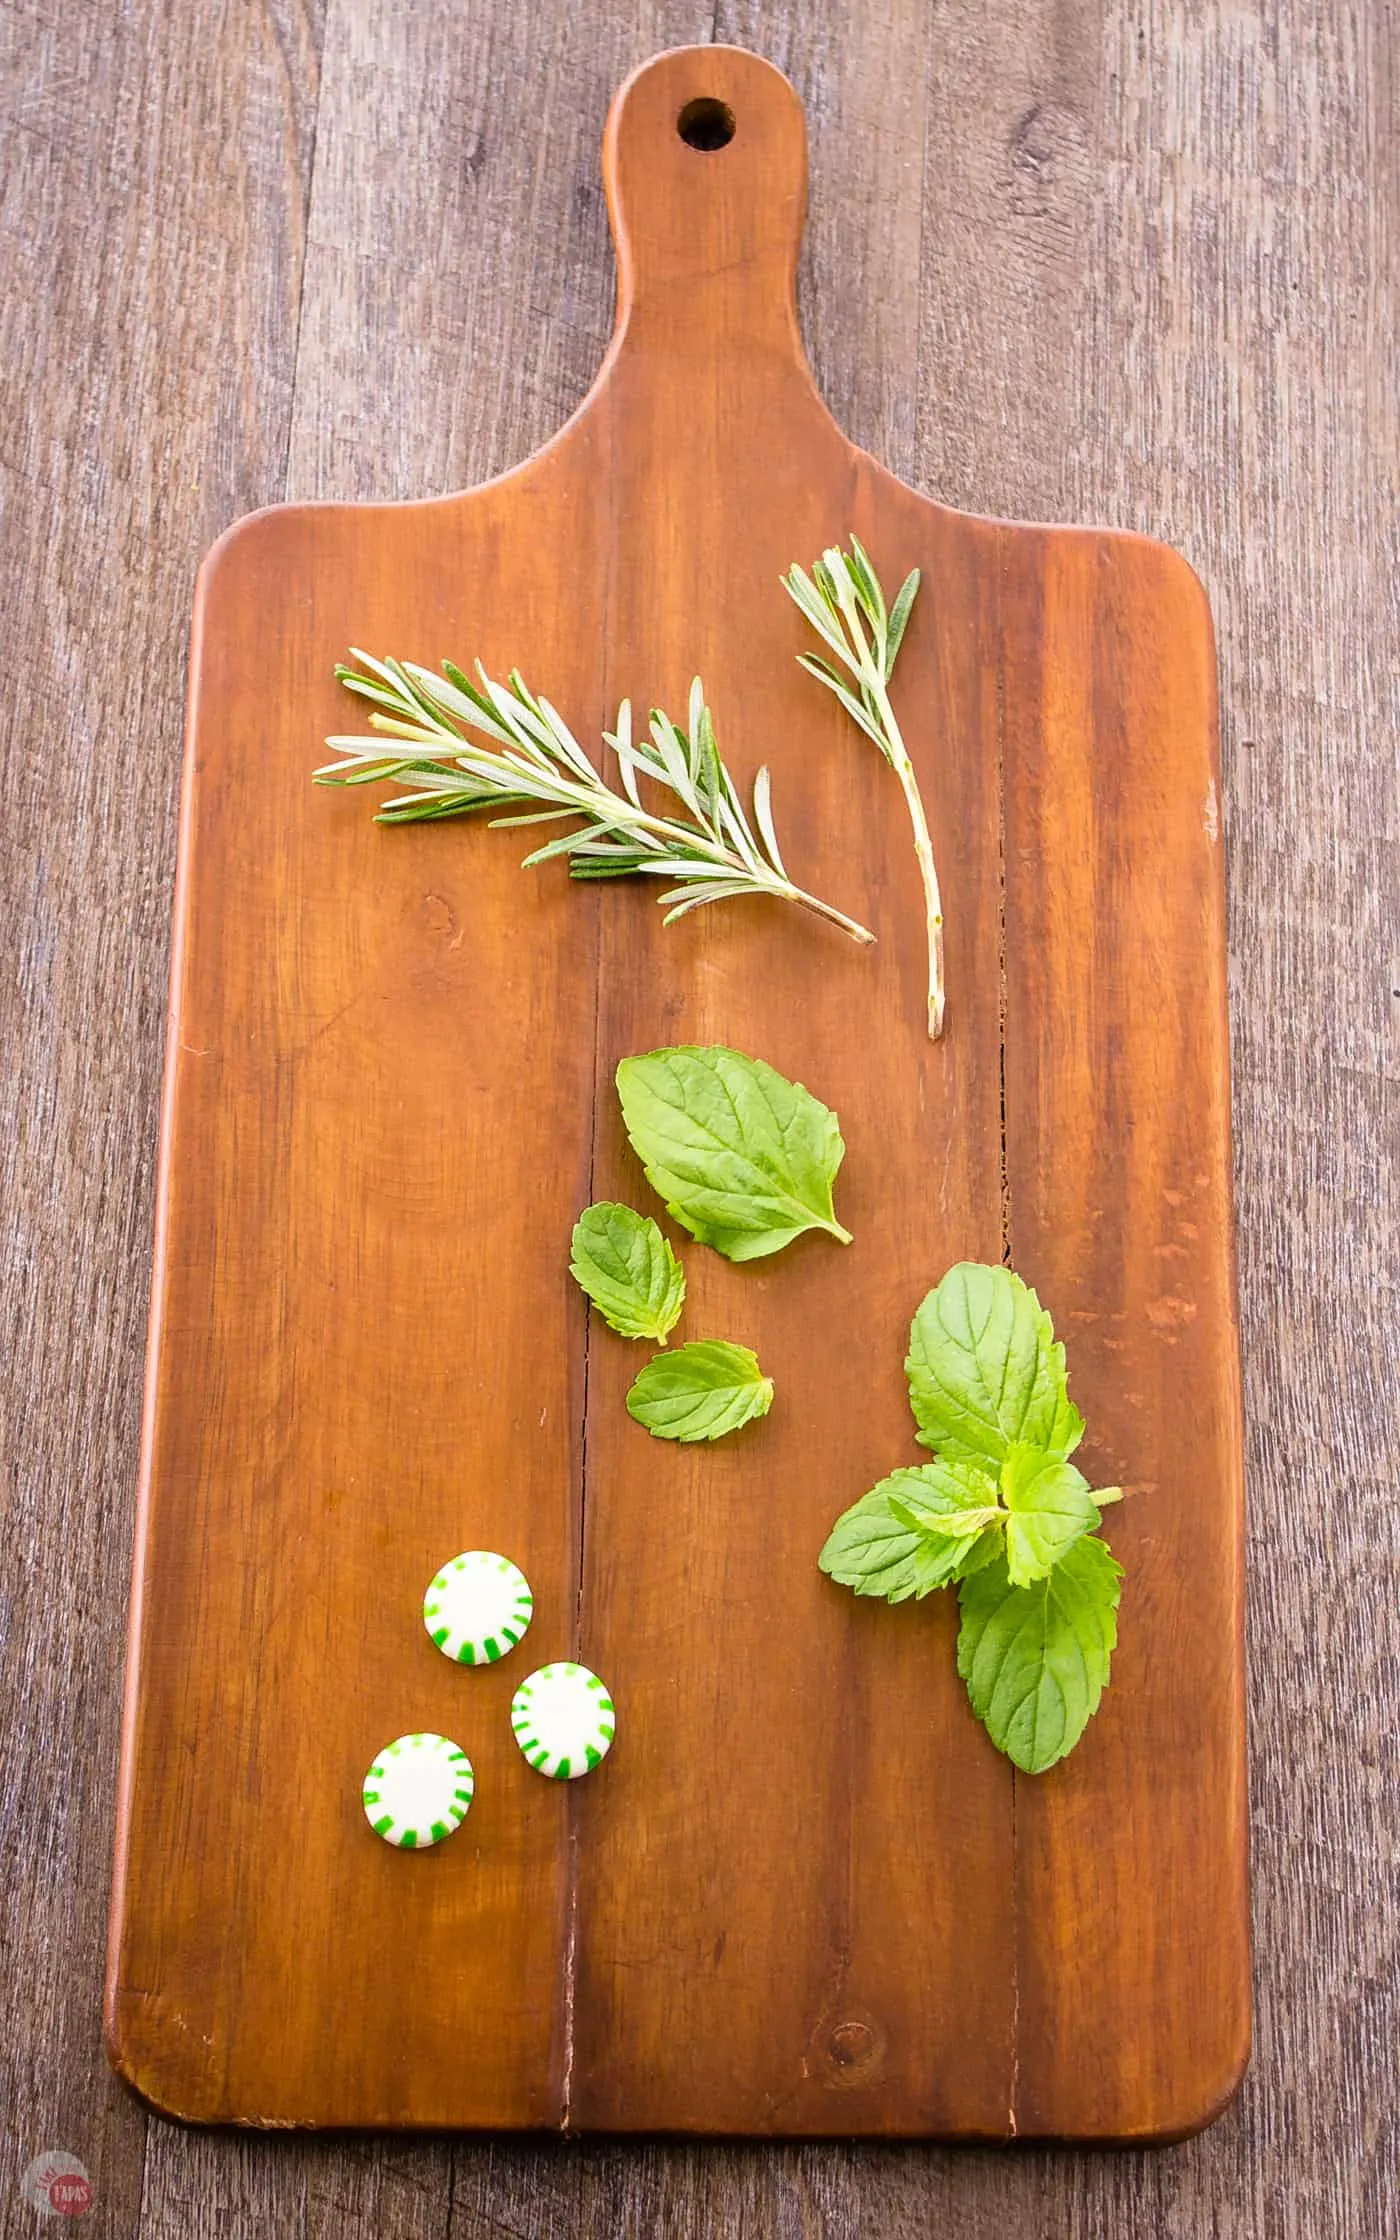 Fresh herbs and candies make great cocktail garnishes too!